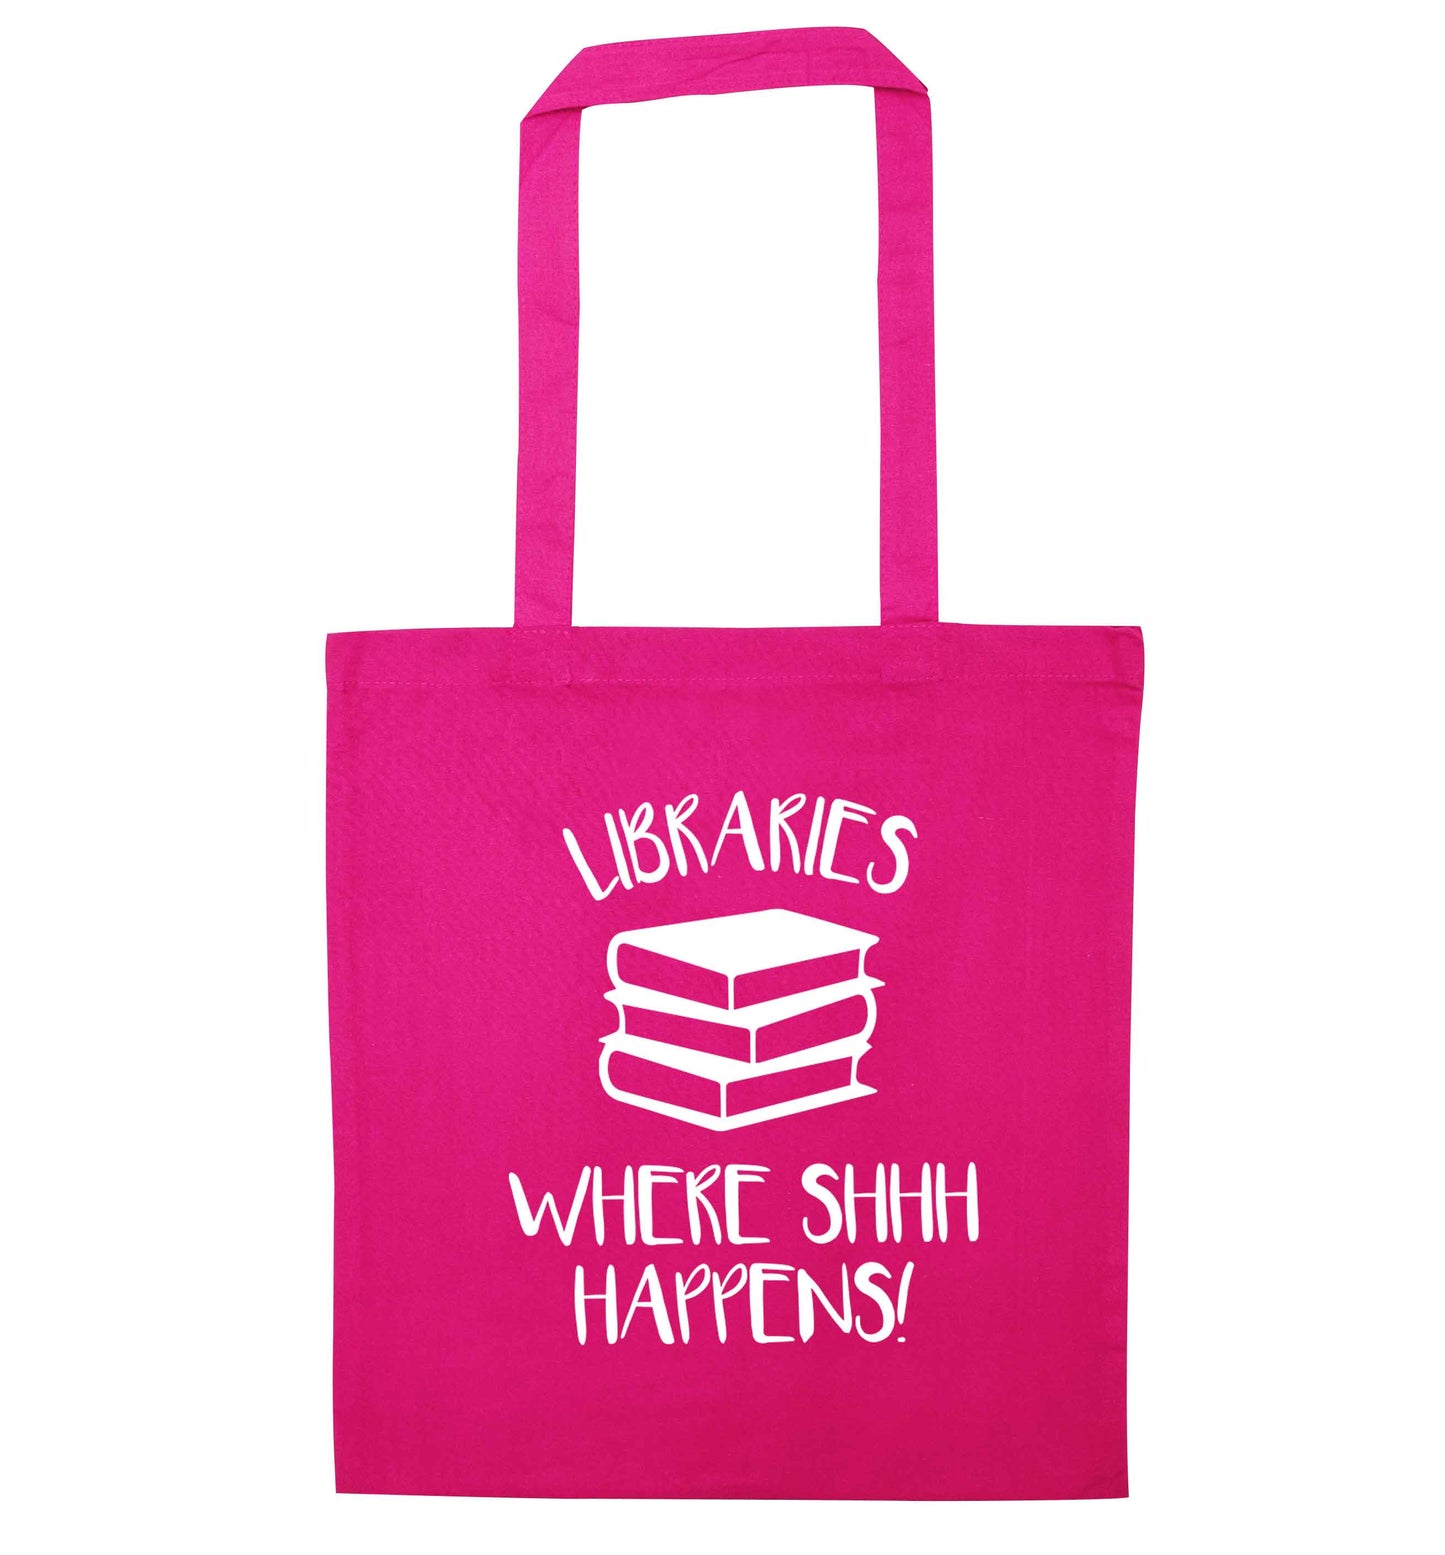 Libraries where shh happens! pink tote bag